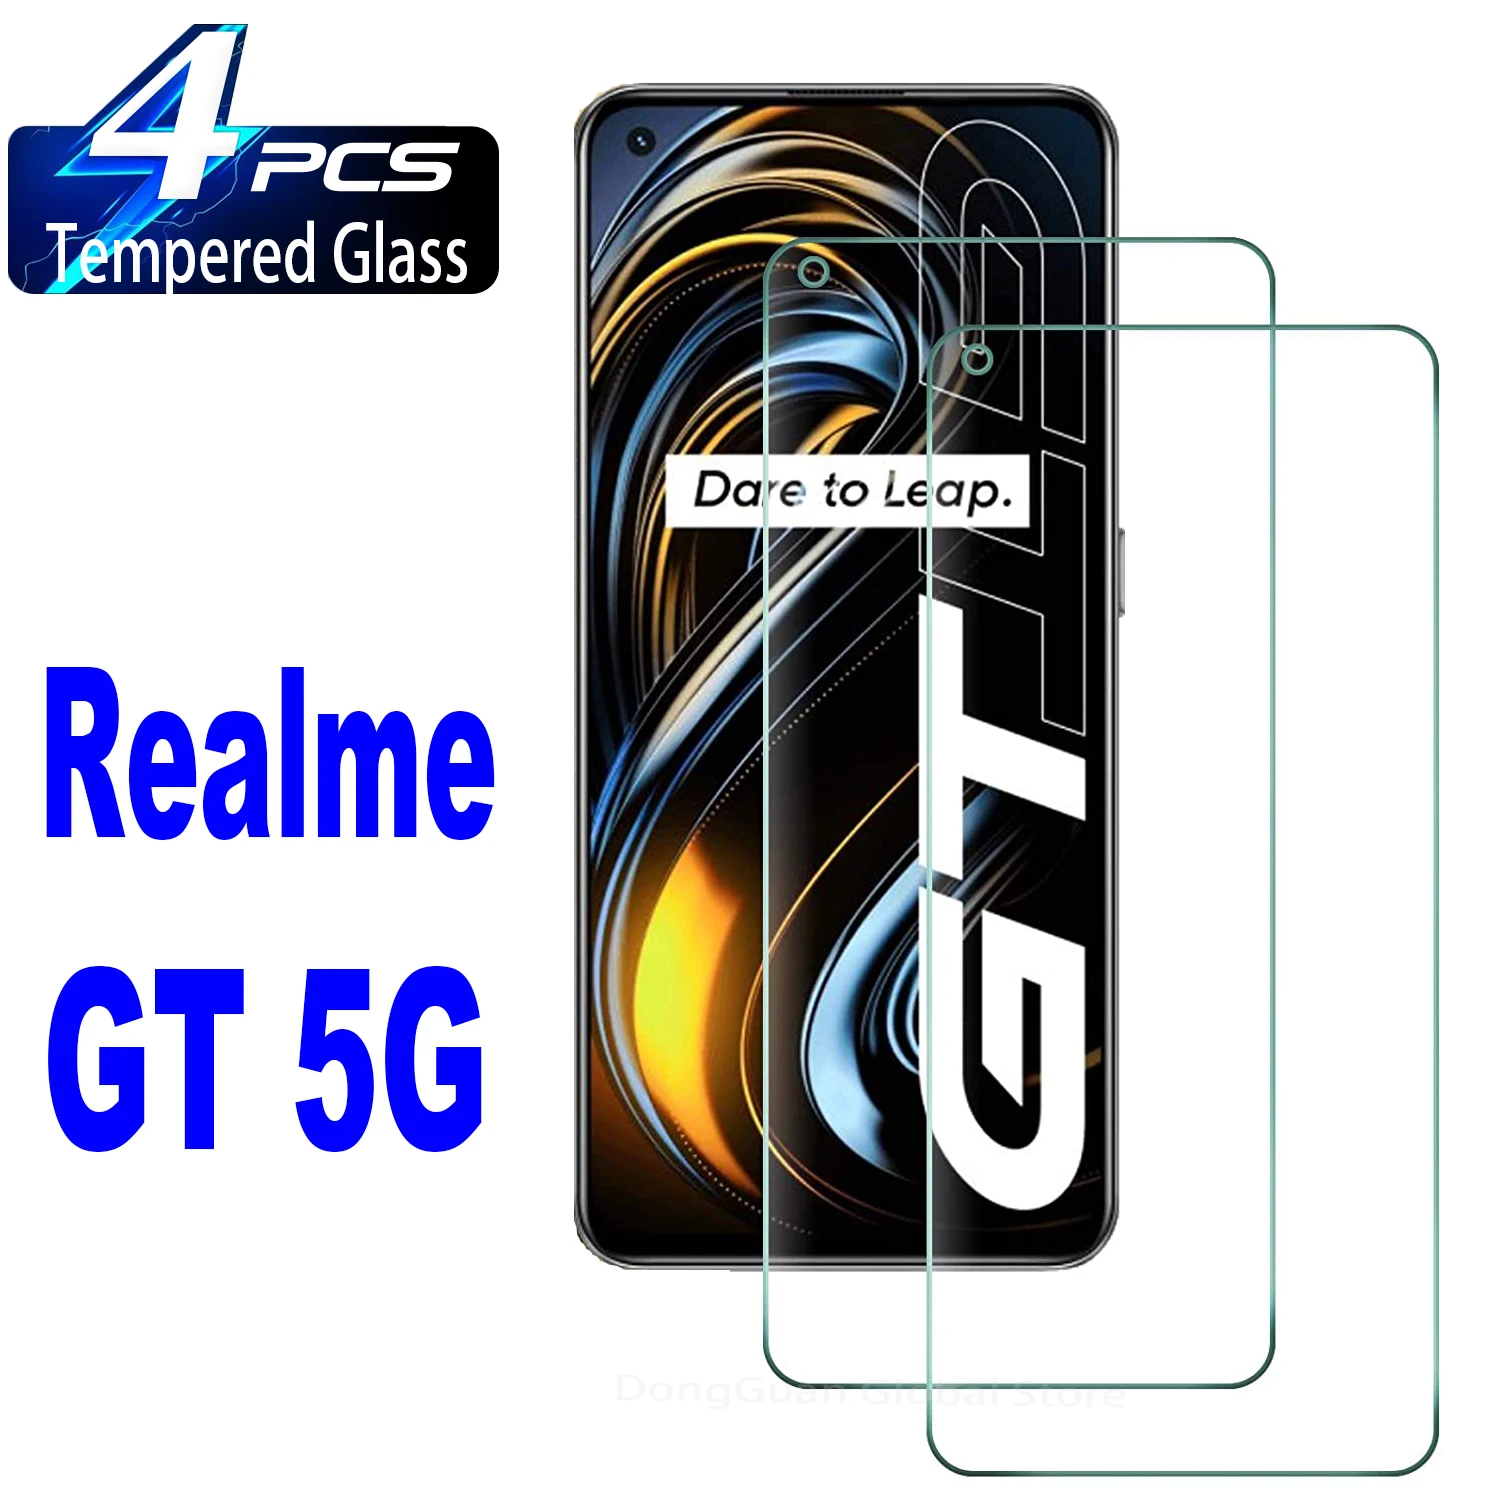 2/4Pcs Tempered Glass For OPPO Realme GT 5G Screen Protector Glass 2pcs for realme x7 max 5g glass clear tempered glass for realme x7 max 5g screen protector film lens for oppo realme x7 max 5g